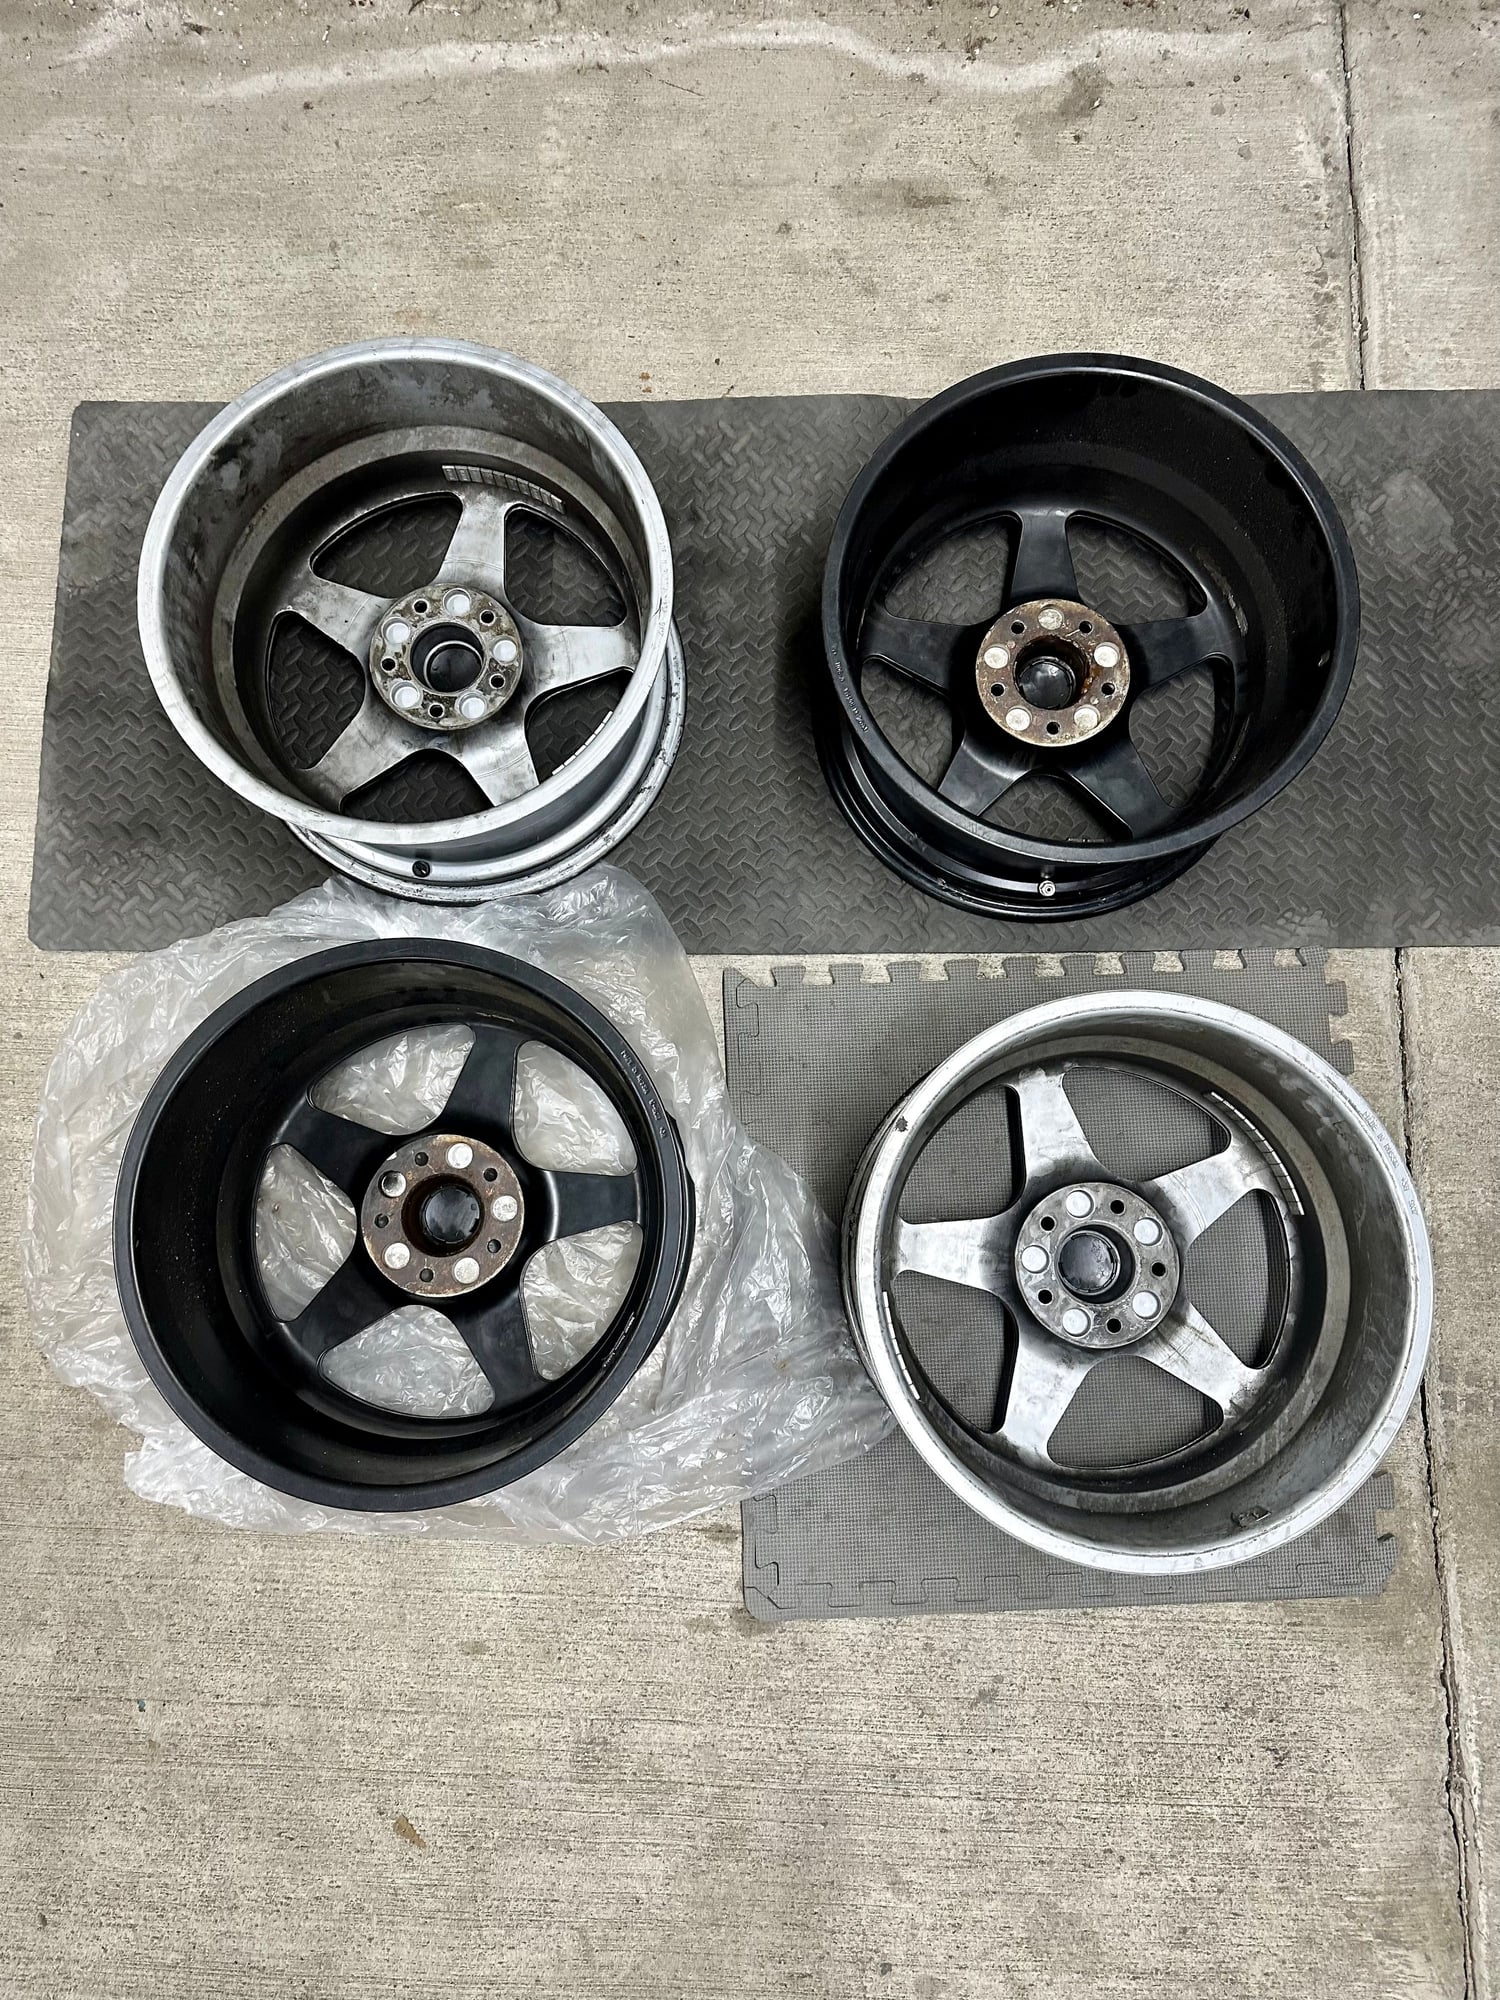 Wheels and Tires/Axles - 17x9 +38mm stock body spec Regamaster MPs - Used - All Years Any Make All Models - Chicago, IL 60647, United States